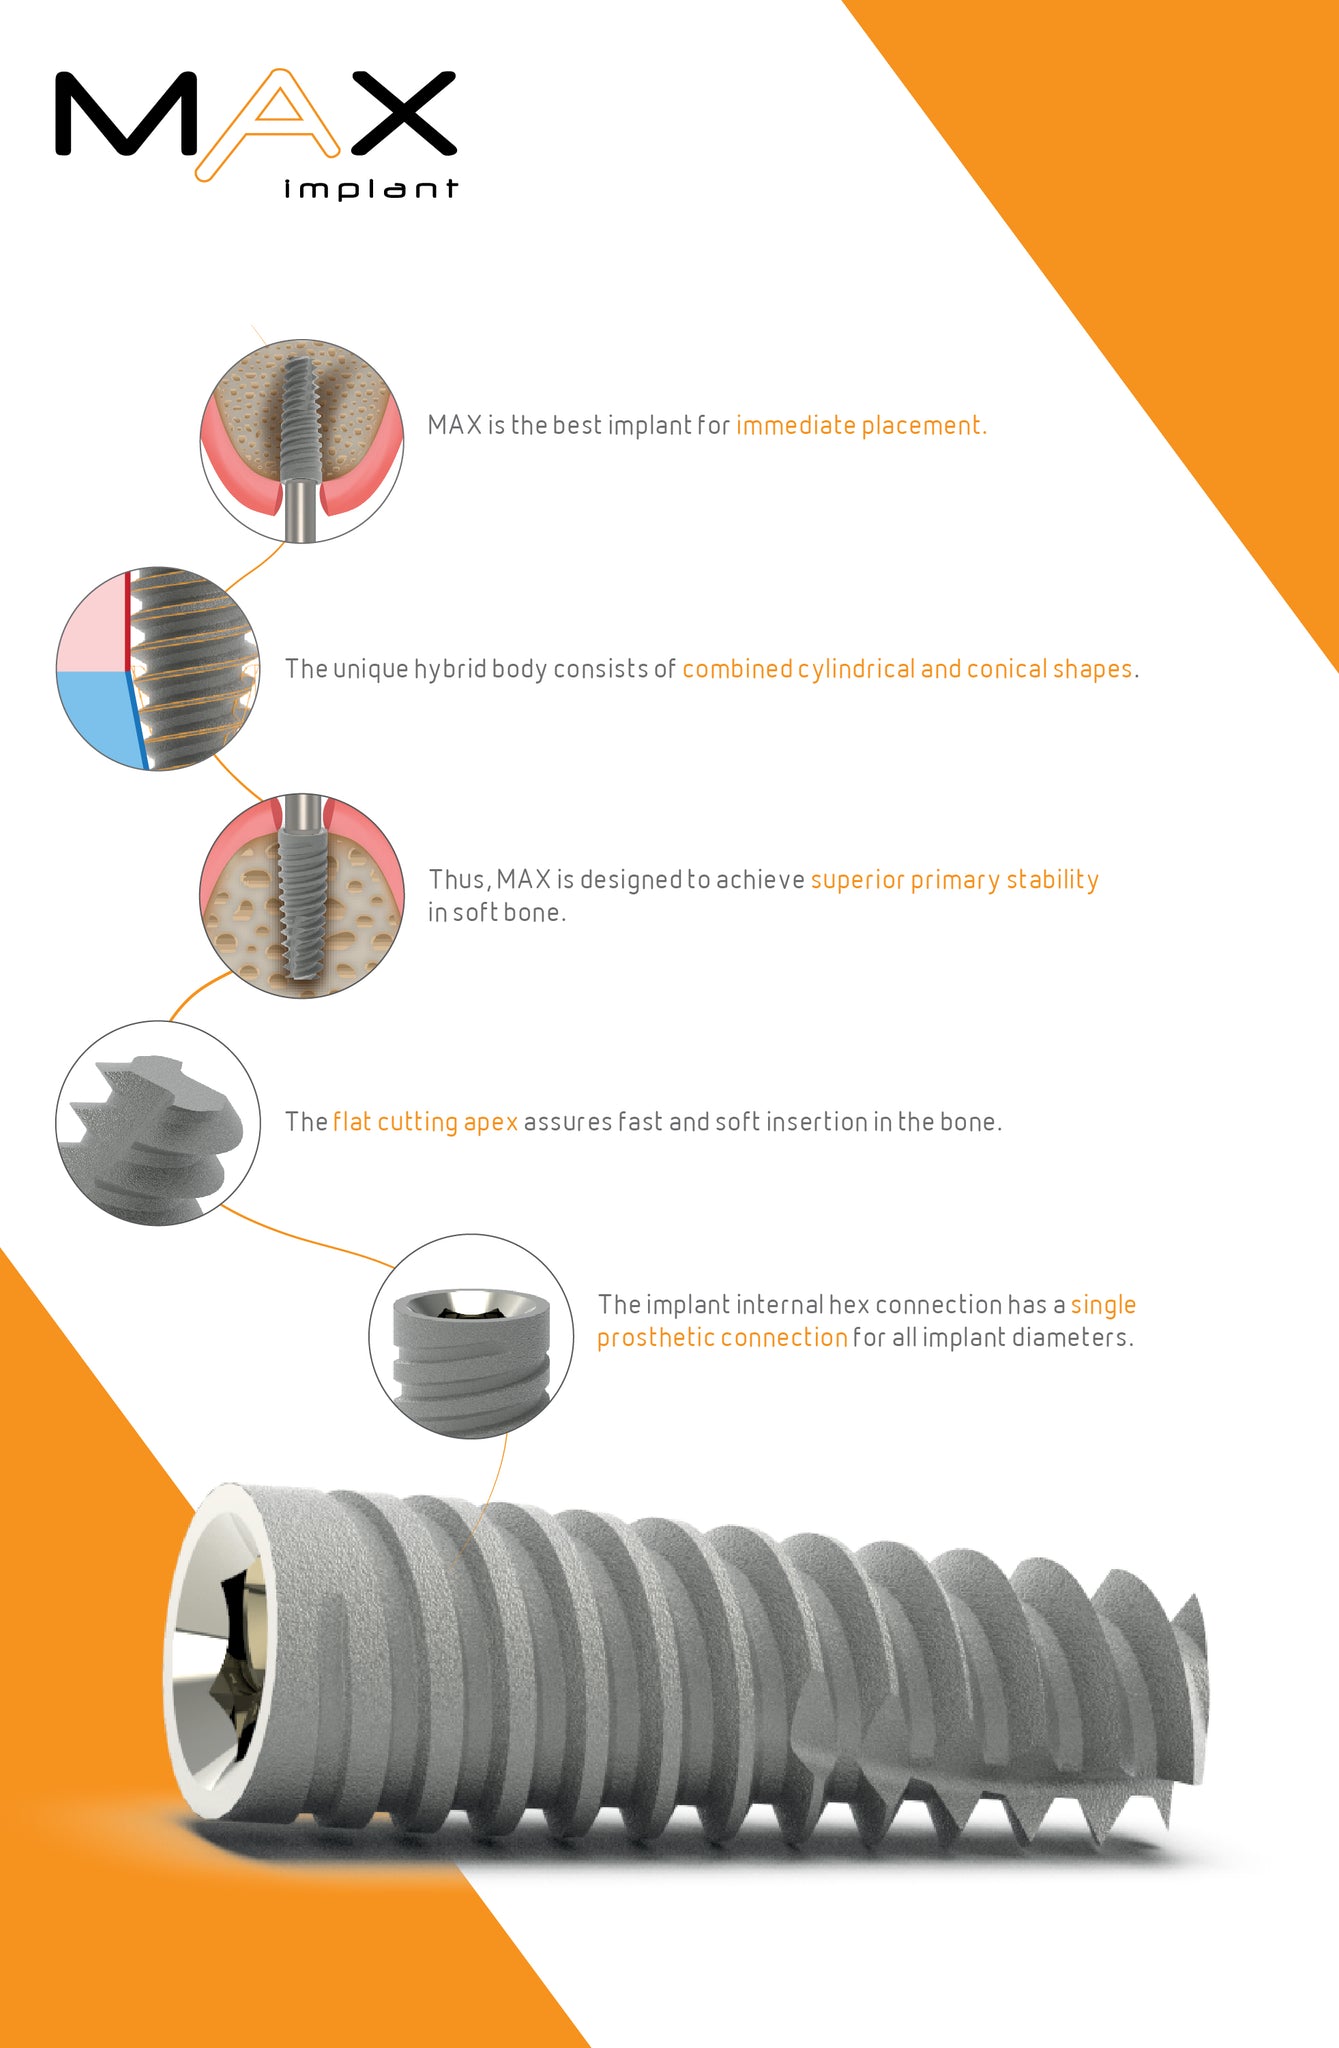 MAX IMPLANT - FLAT CUTTING APEX , Implant featuring an SLA surface, combined cylindrical-conical body, twin-thread design, and apically tapered form. Made of titanium alloy Ti 6Al 4V ELI, with a 2.42mm internal hex screw connection and sandblasted-acid-etched surface. alfa gate dental implants